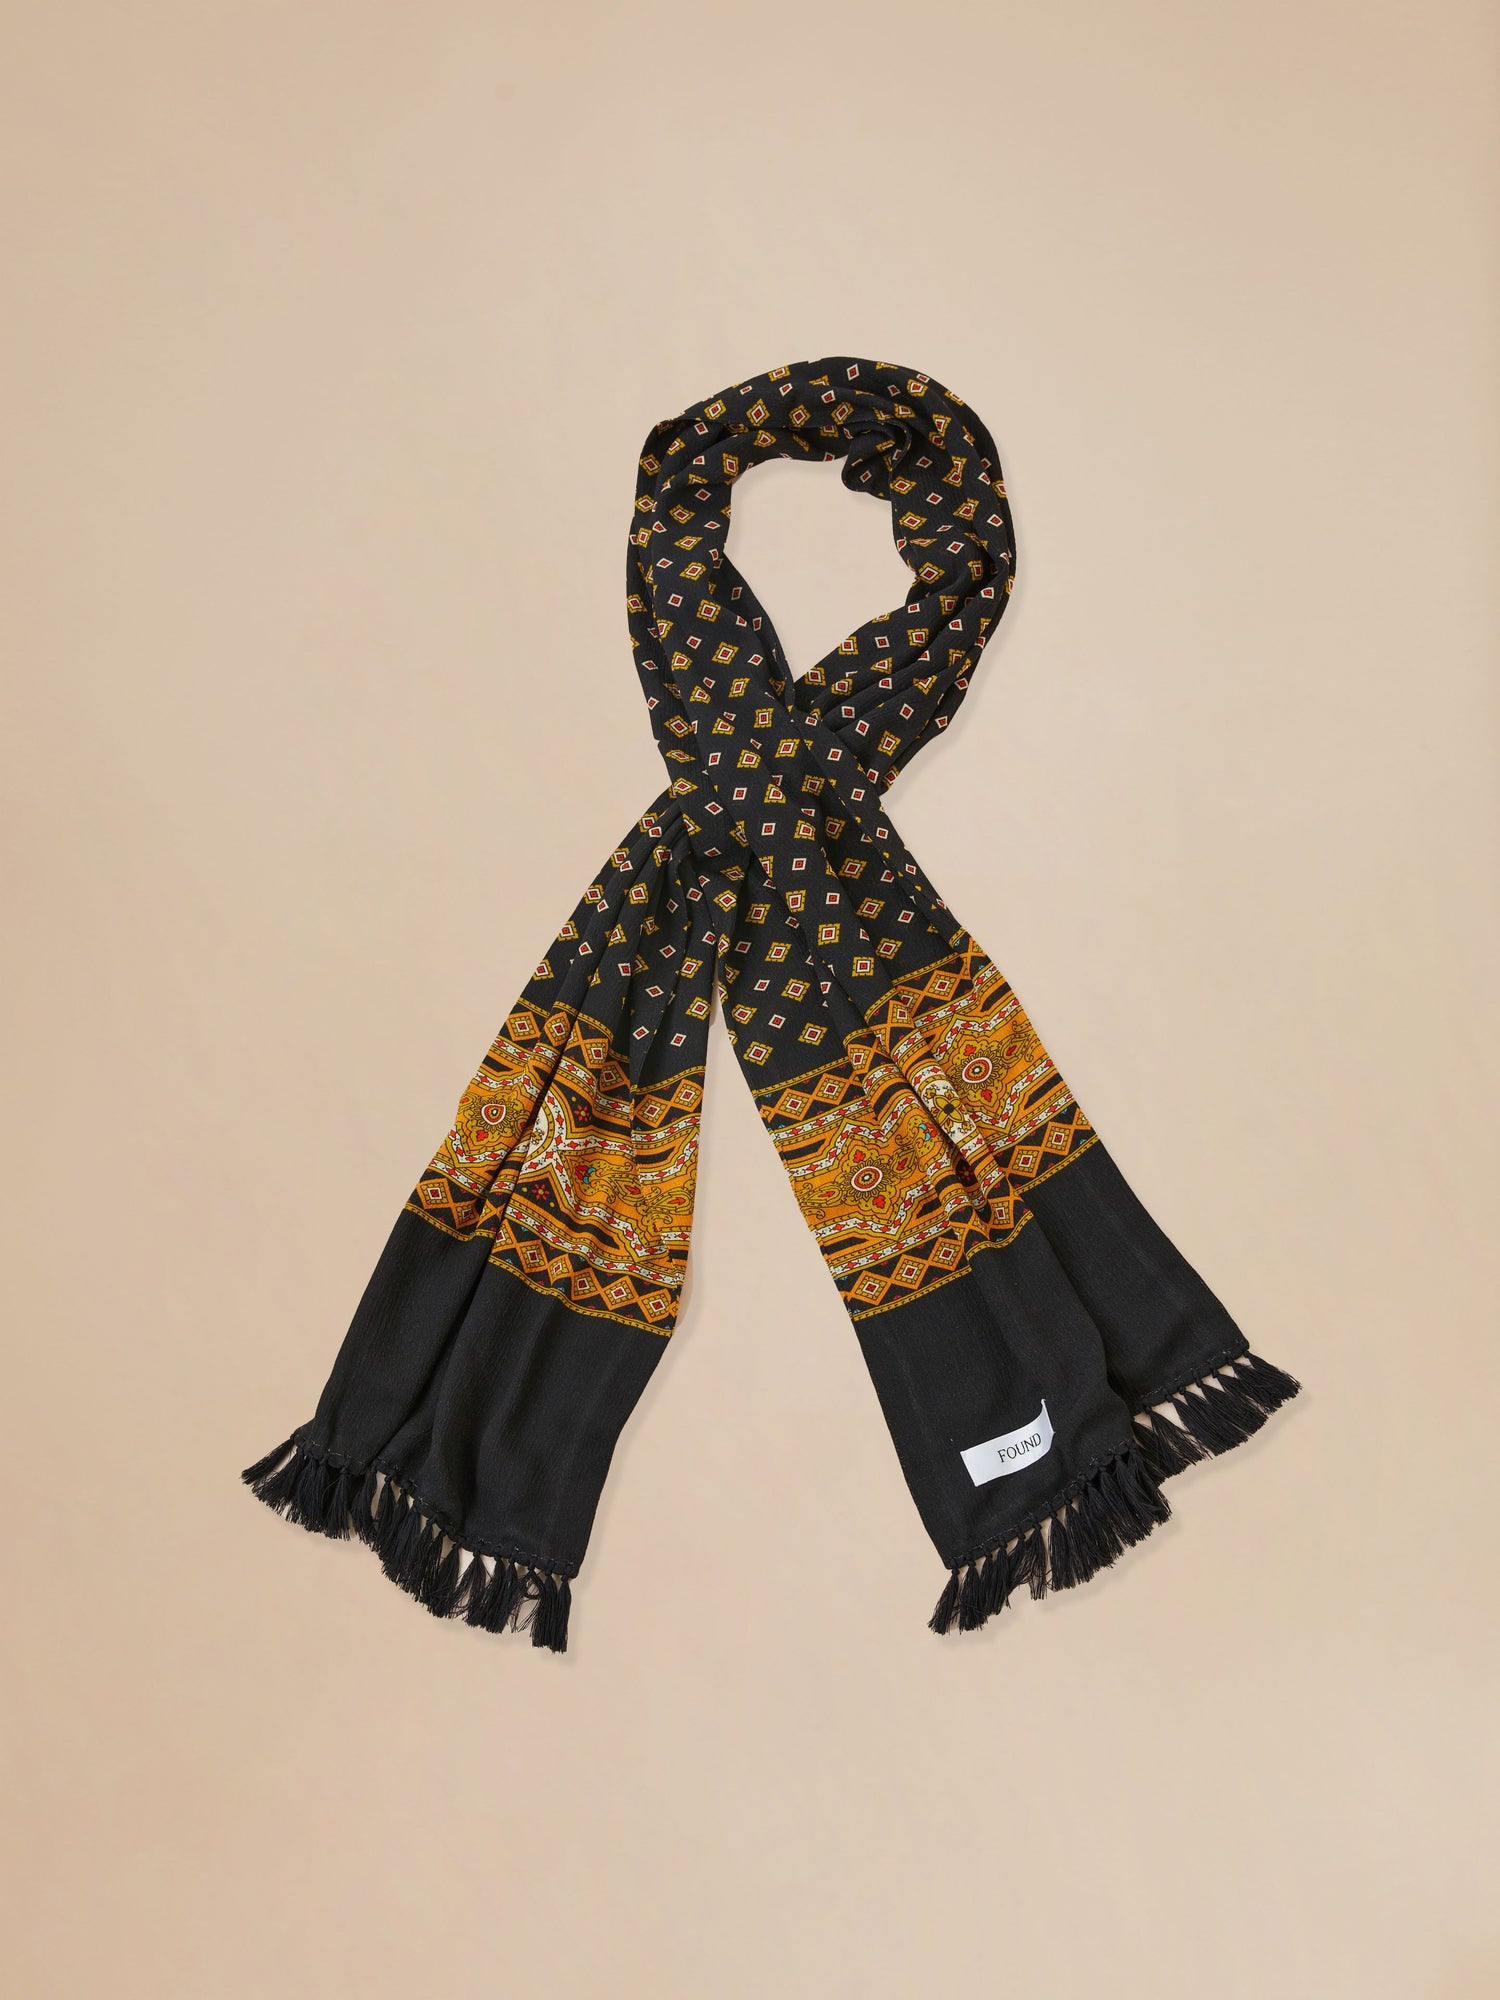 A Pastures Print Scarf with hand-tied tassels by Found.